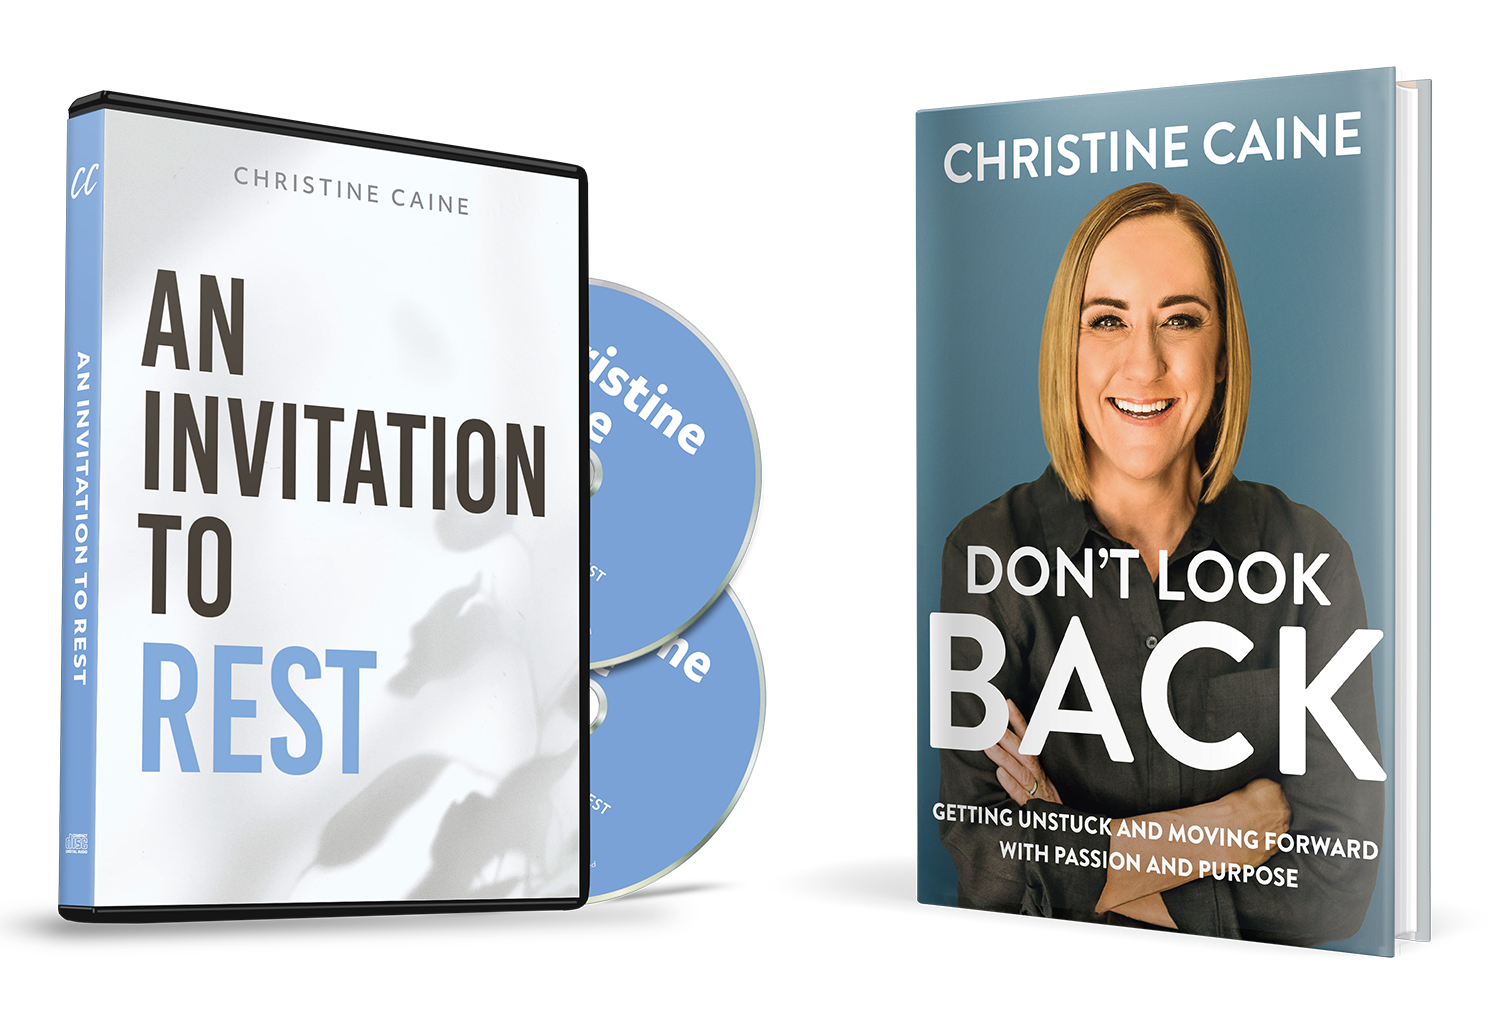 An Invitation to Rest & Don't Look Back by Christine Caine by TBN